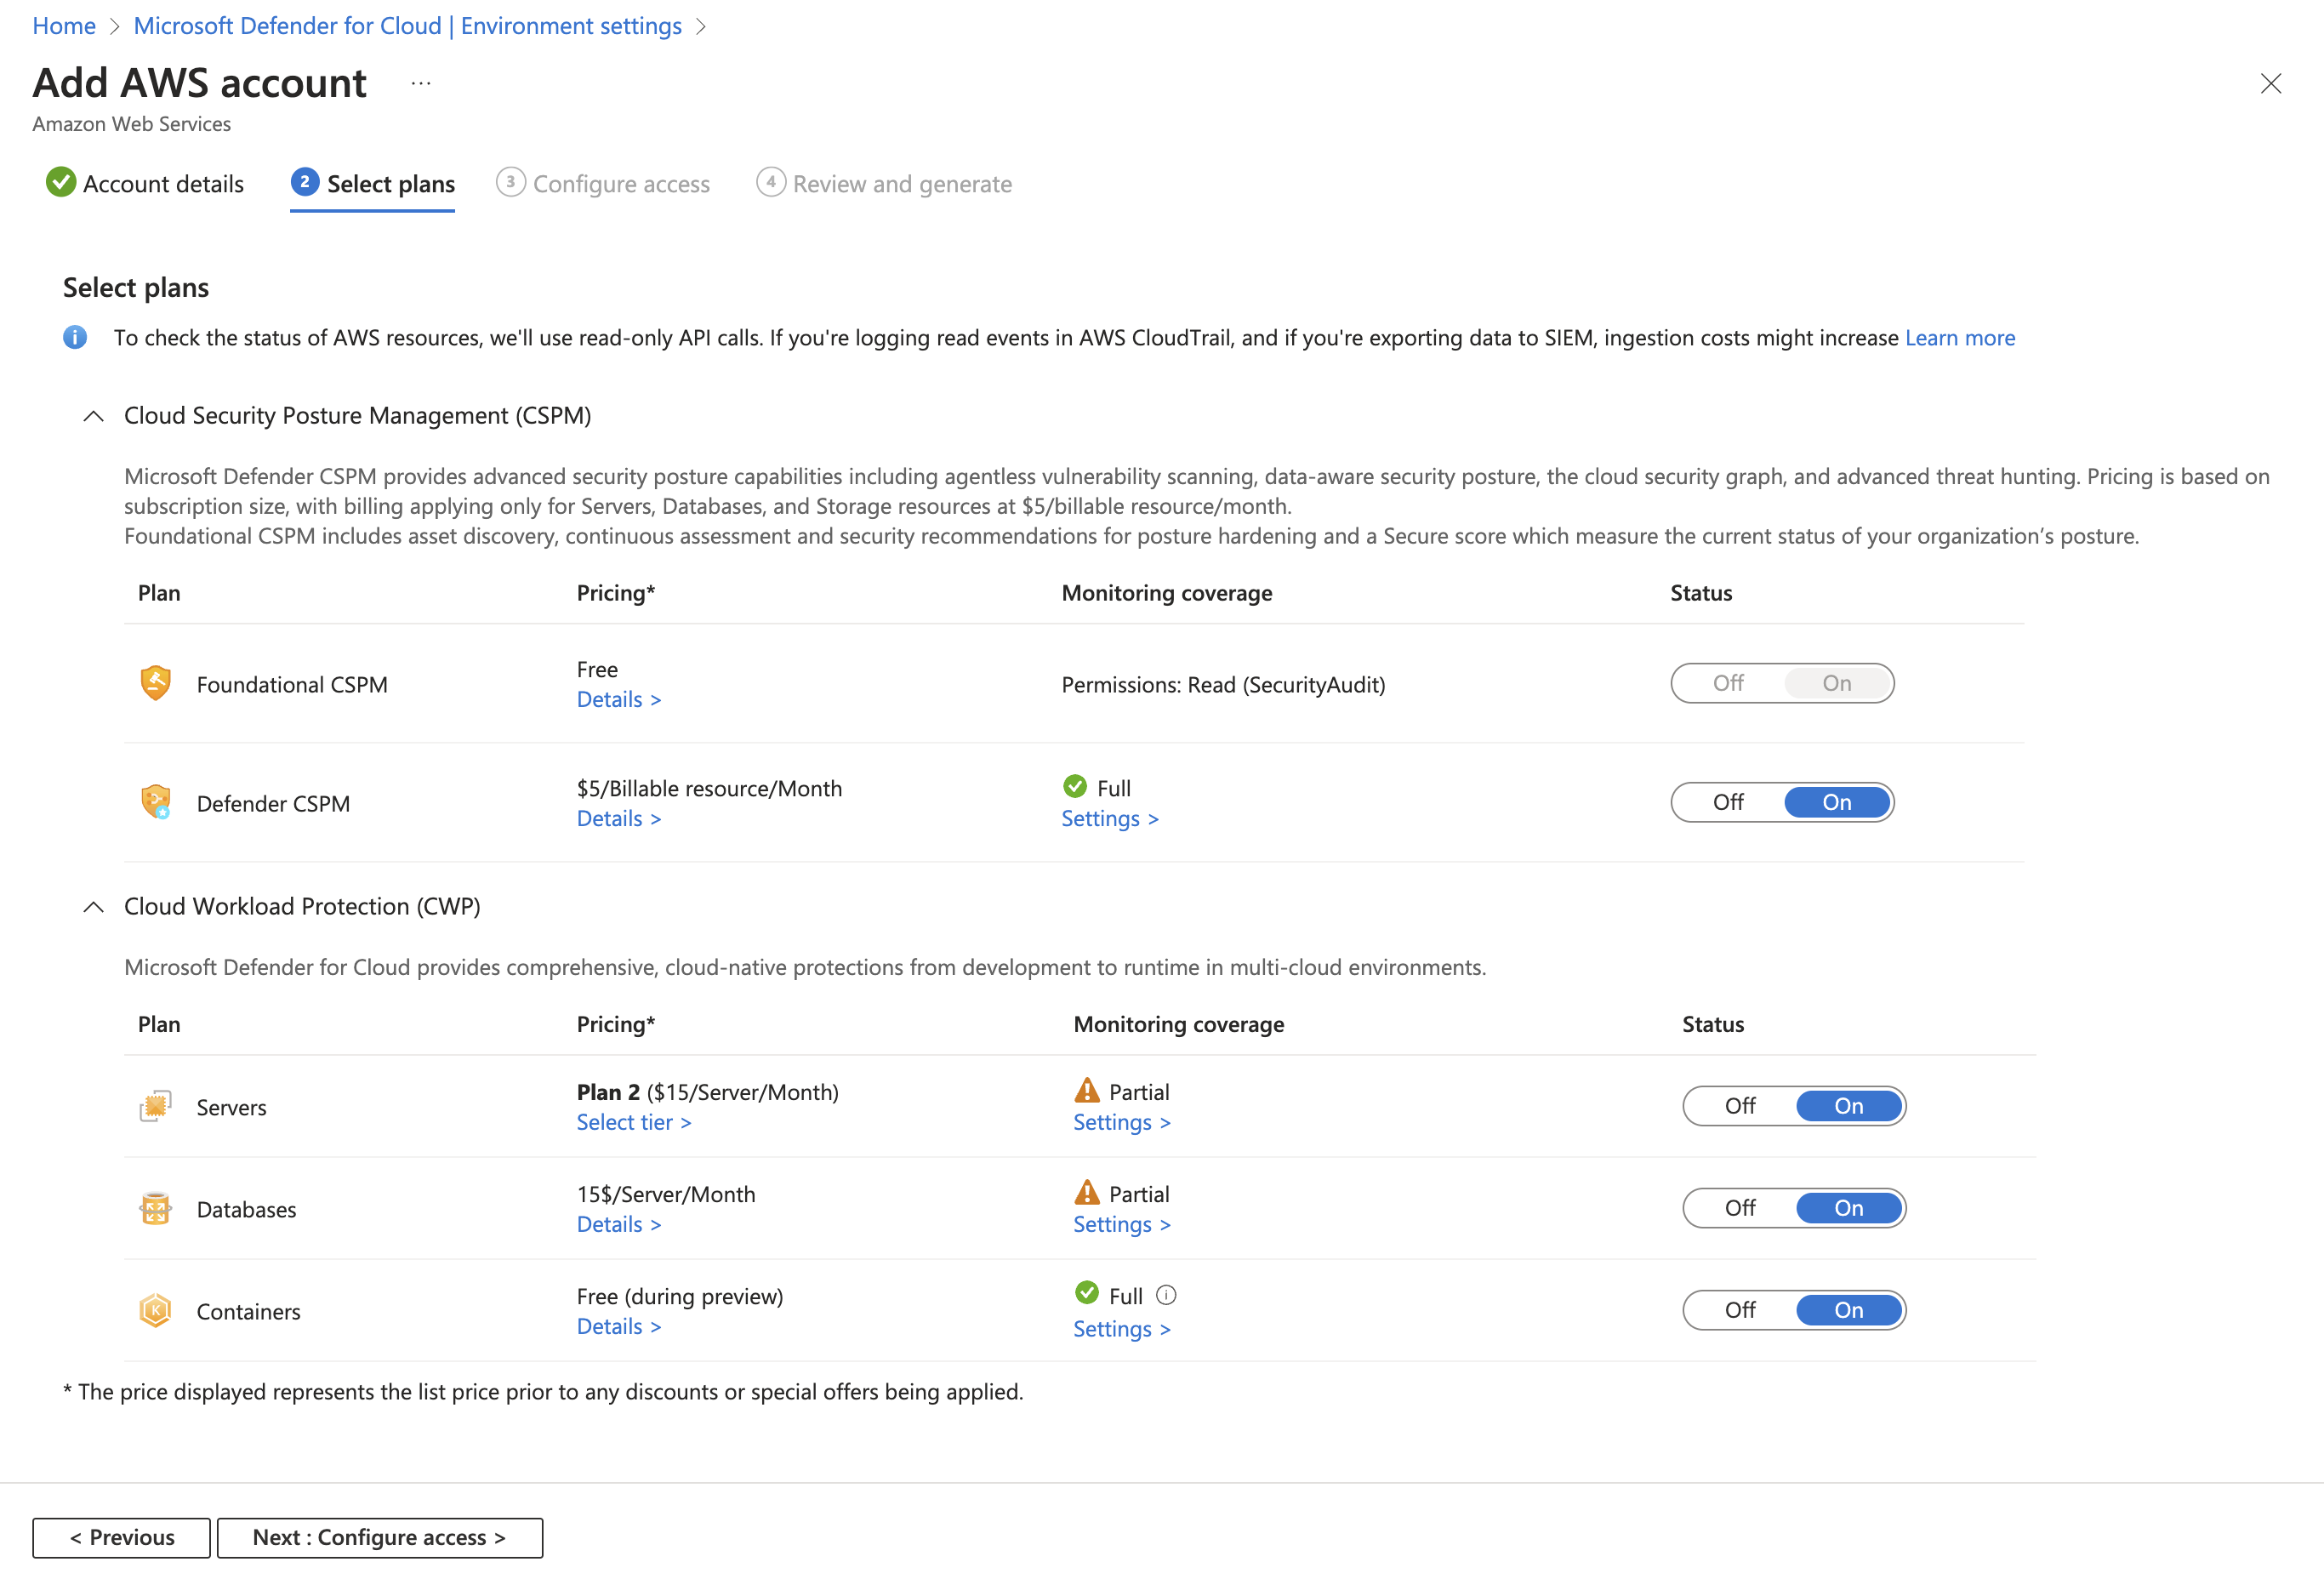 The select plans tab is where you choose which Defender for Cloud capabilities to enable for this AWS account.